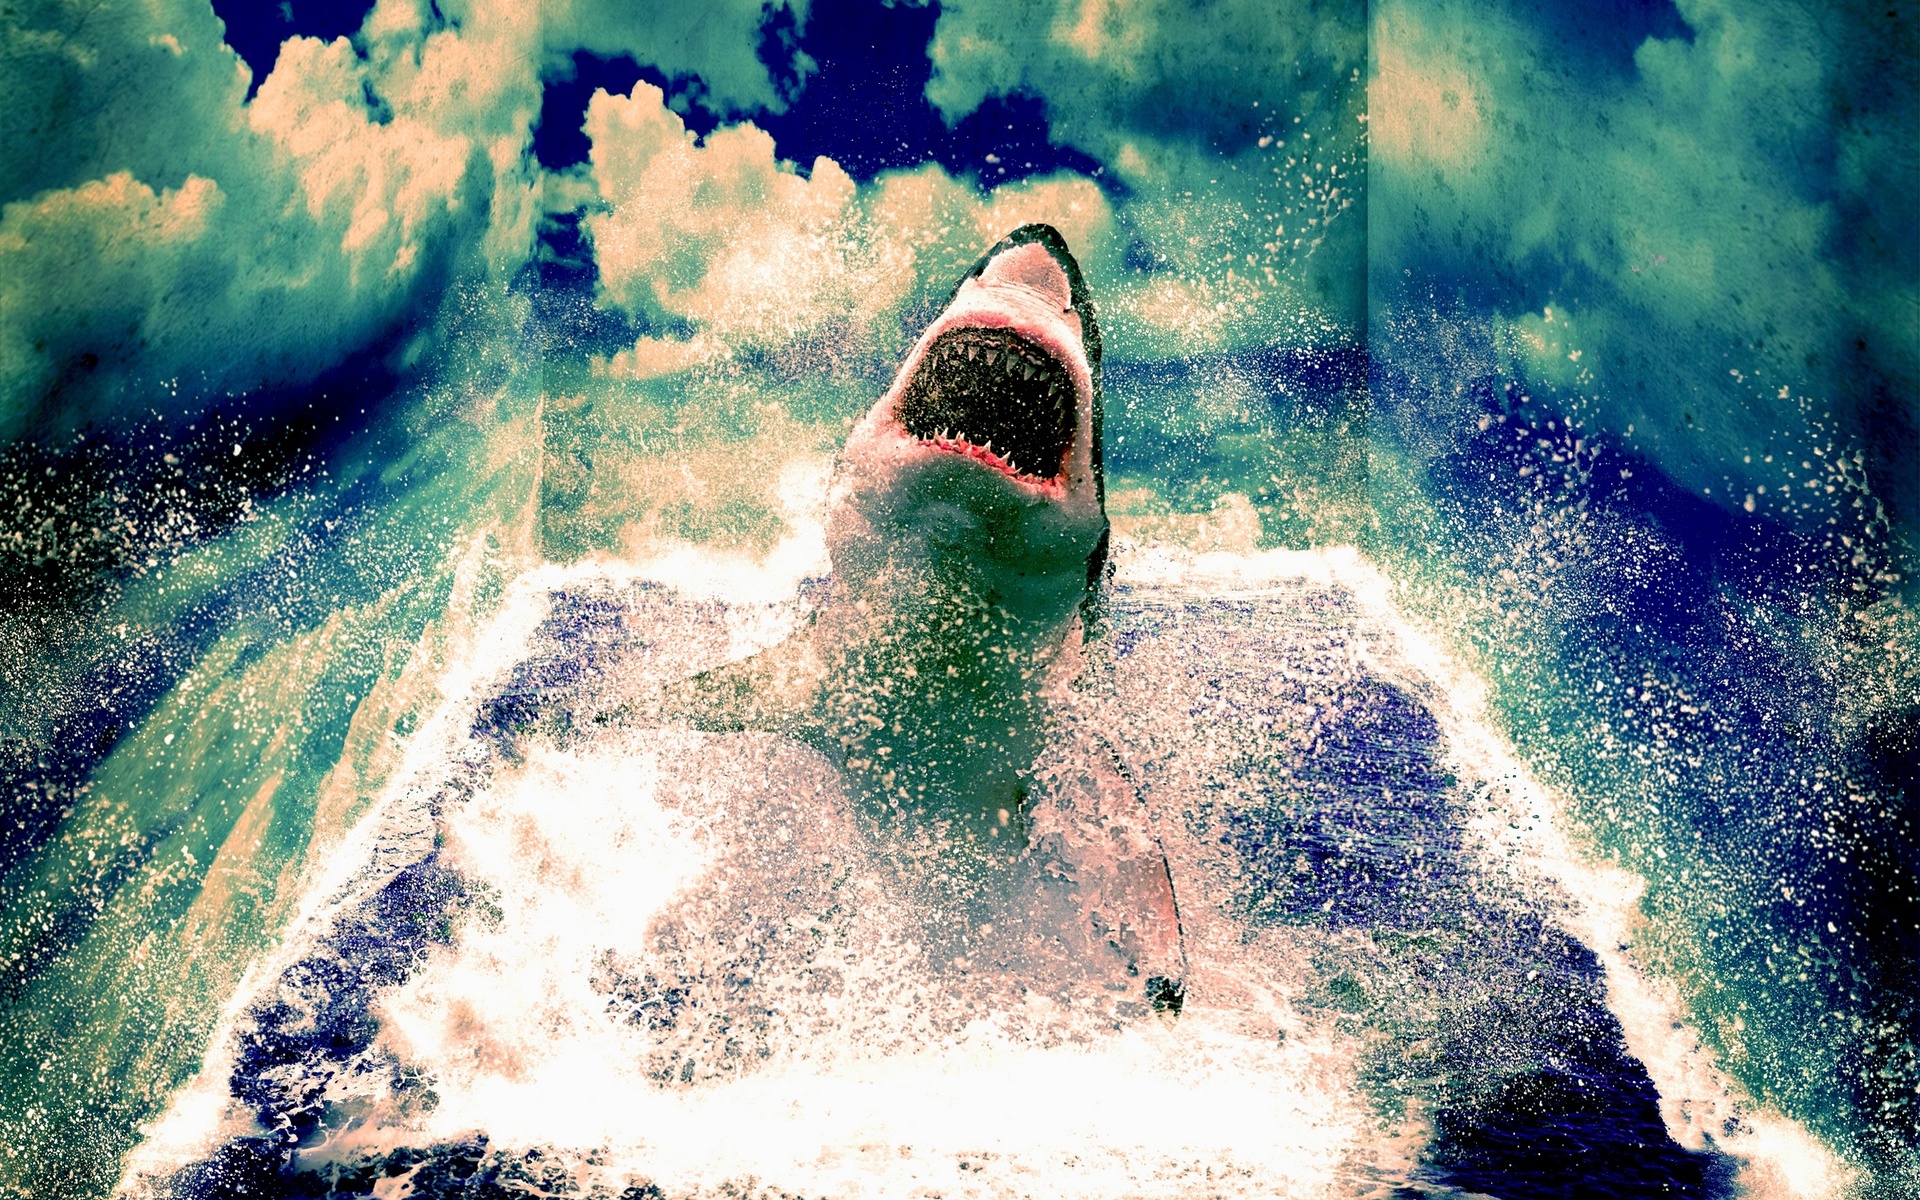 animals, Sharks, Manipulation, Art, Cg, Digital, Artistic, 3d, Psychedelic, Mind, Teaser, Ocean, Sea, Nature, Sky, Clouds, Waves, Scary, Spooky, Fangs, Jaws, Movies Wallpaper